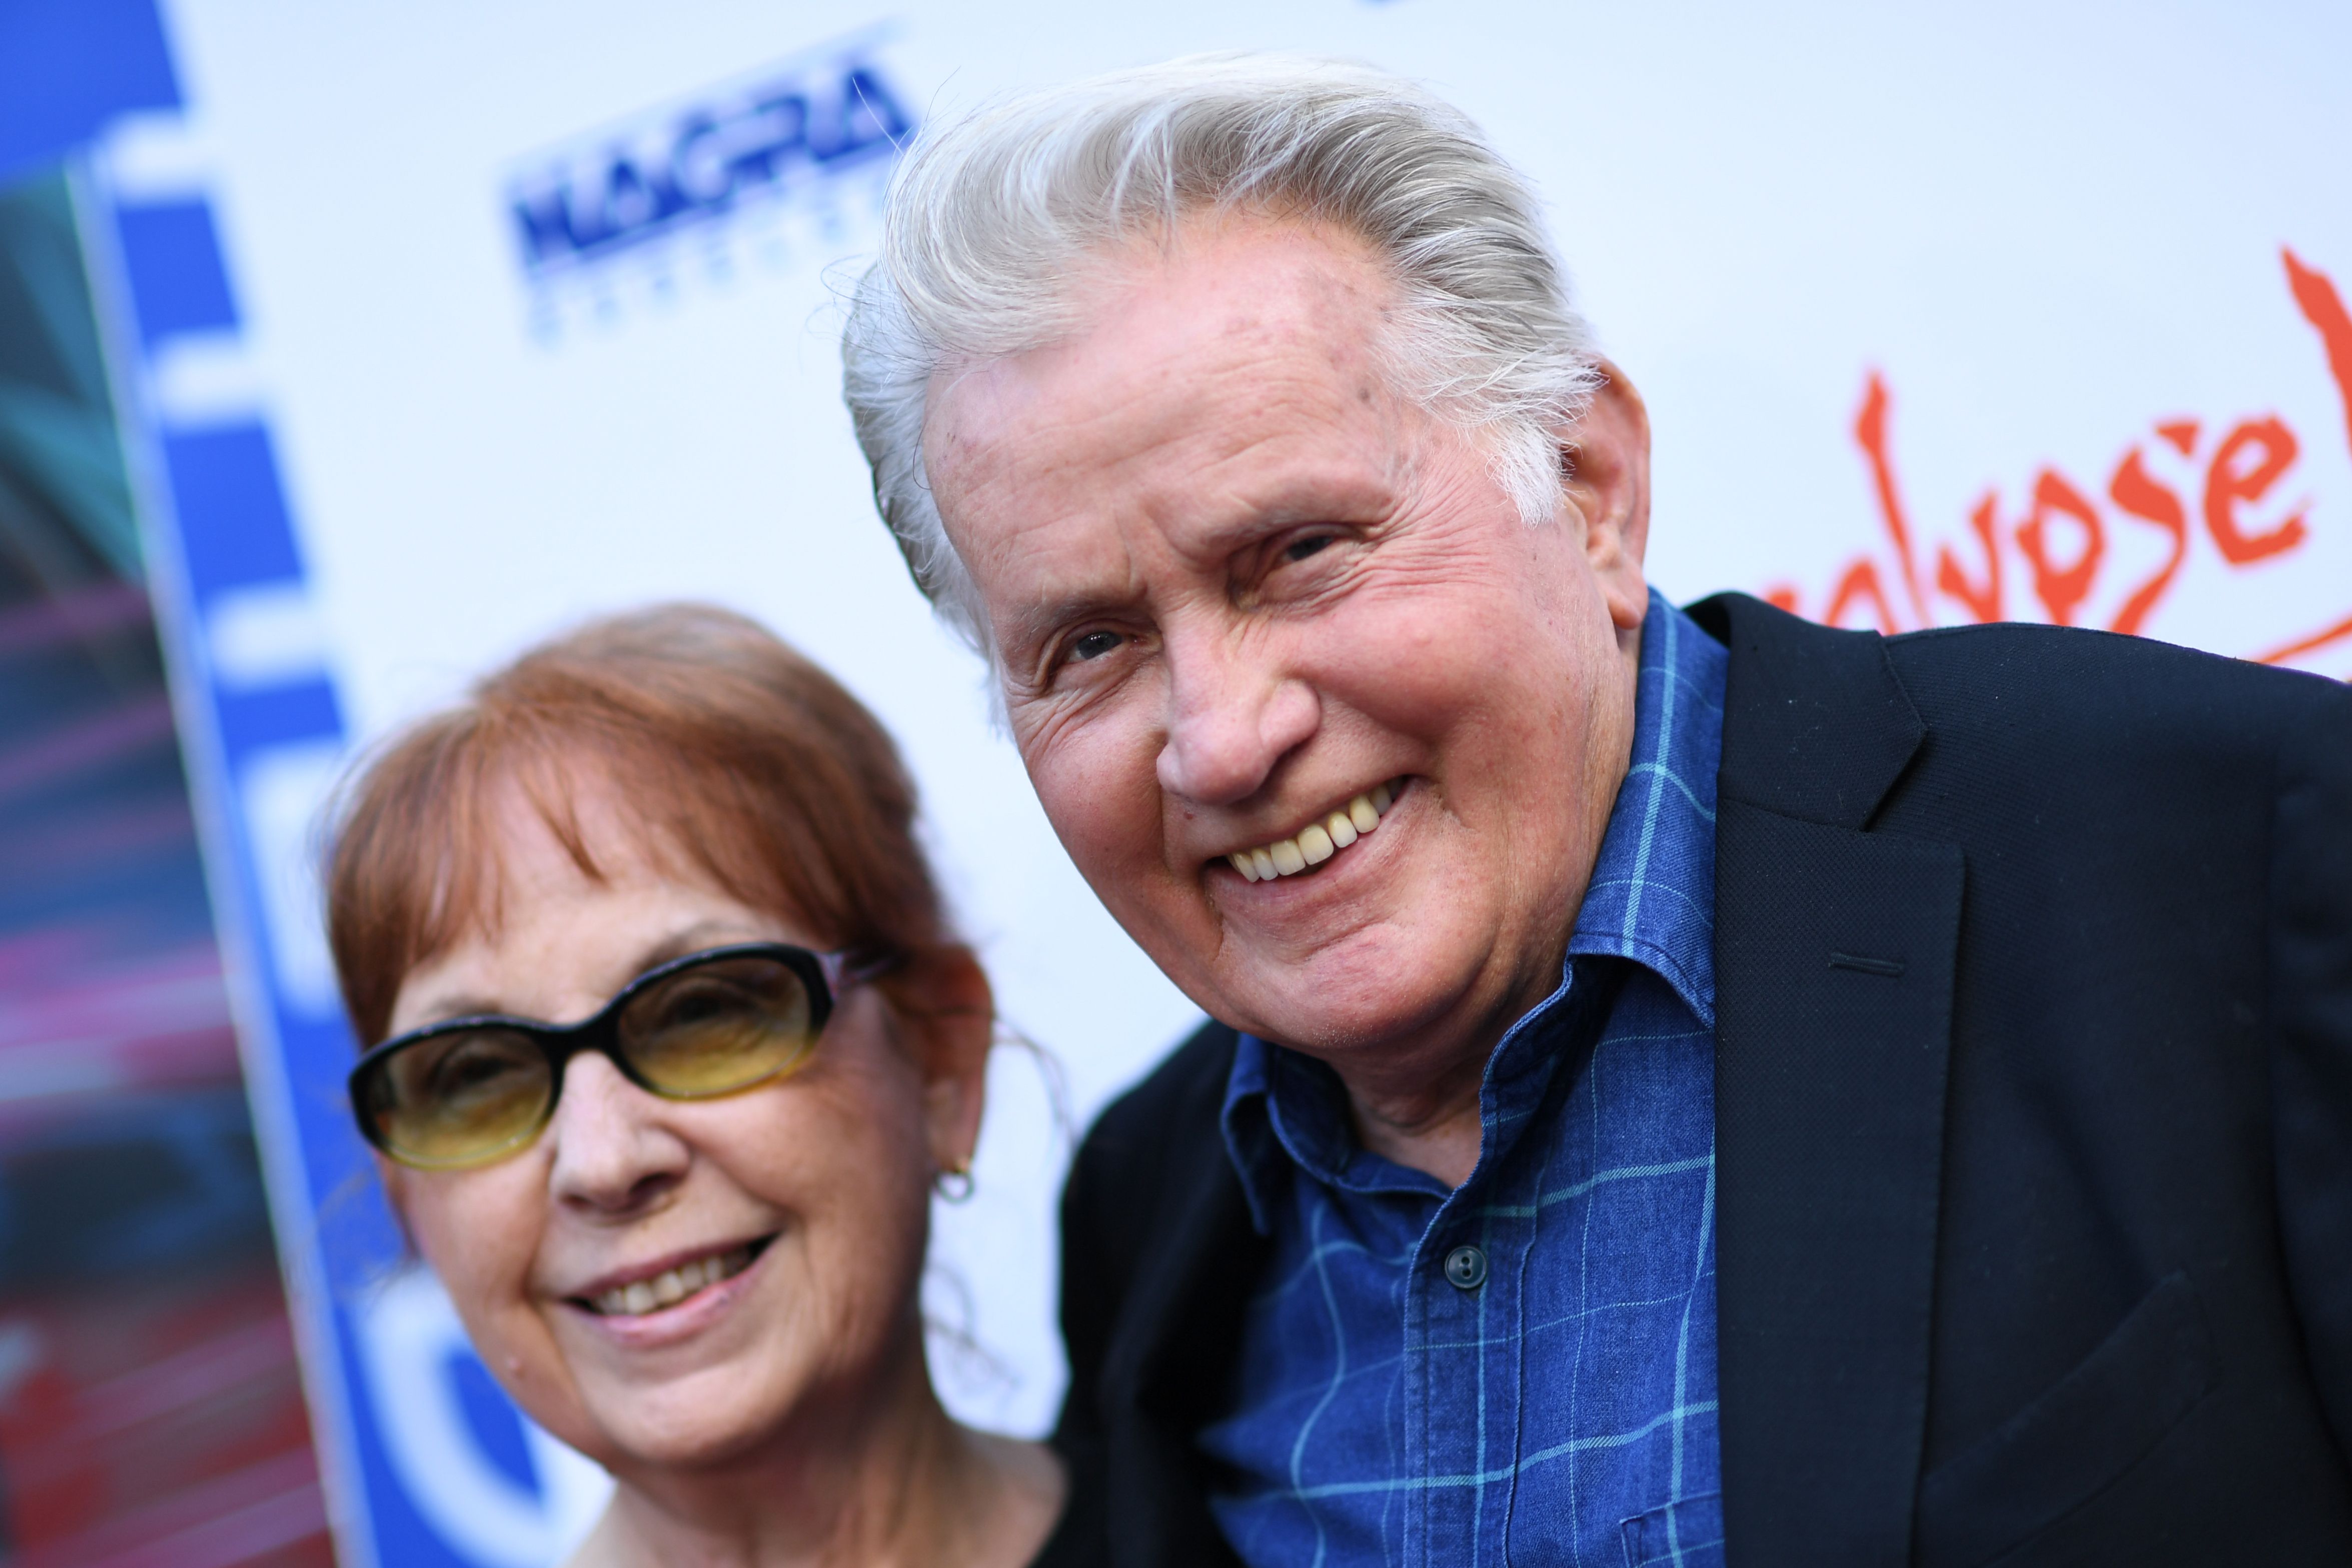 Martin Sheen and actress Janet Sheen attend the "Apocalypse Now Final Cut" red carpet screening on August 12, 2019 in Los Angeles | Source: Getty Images